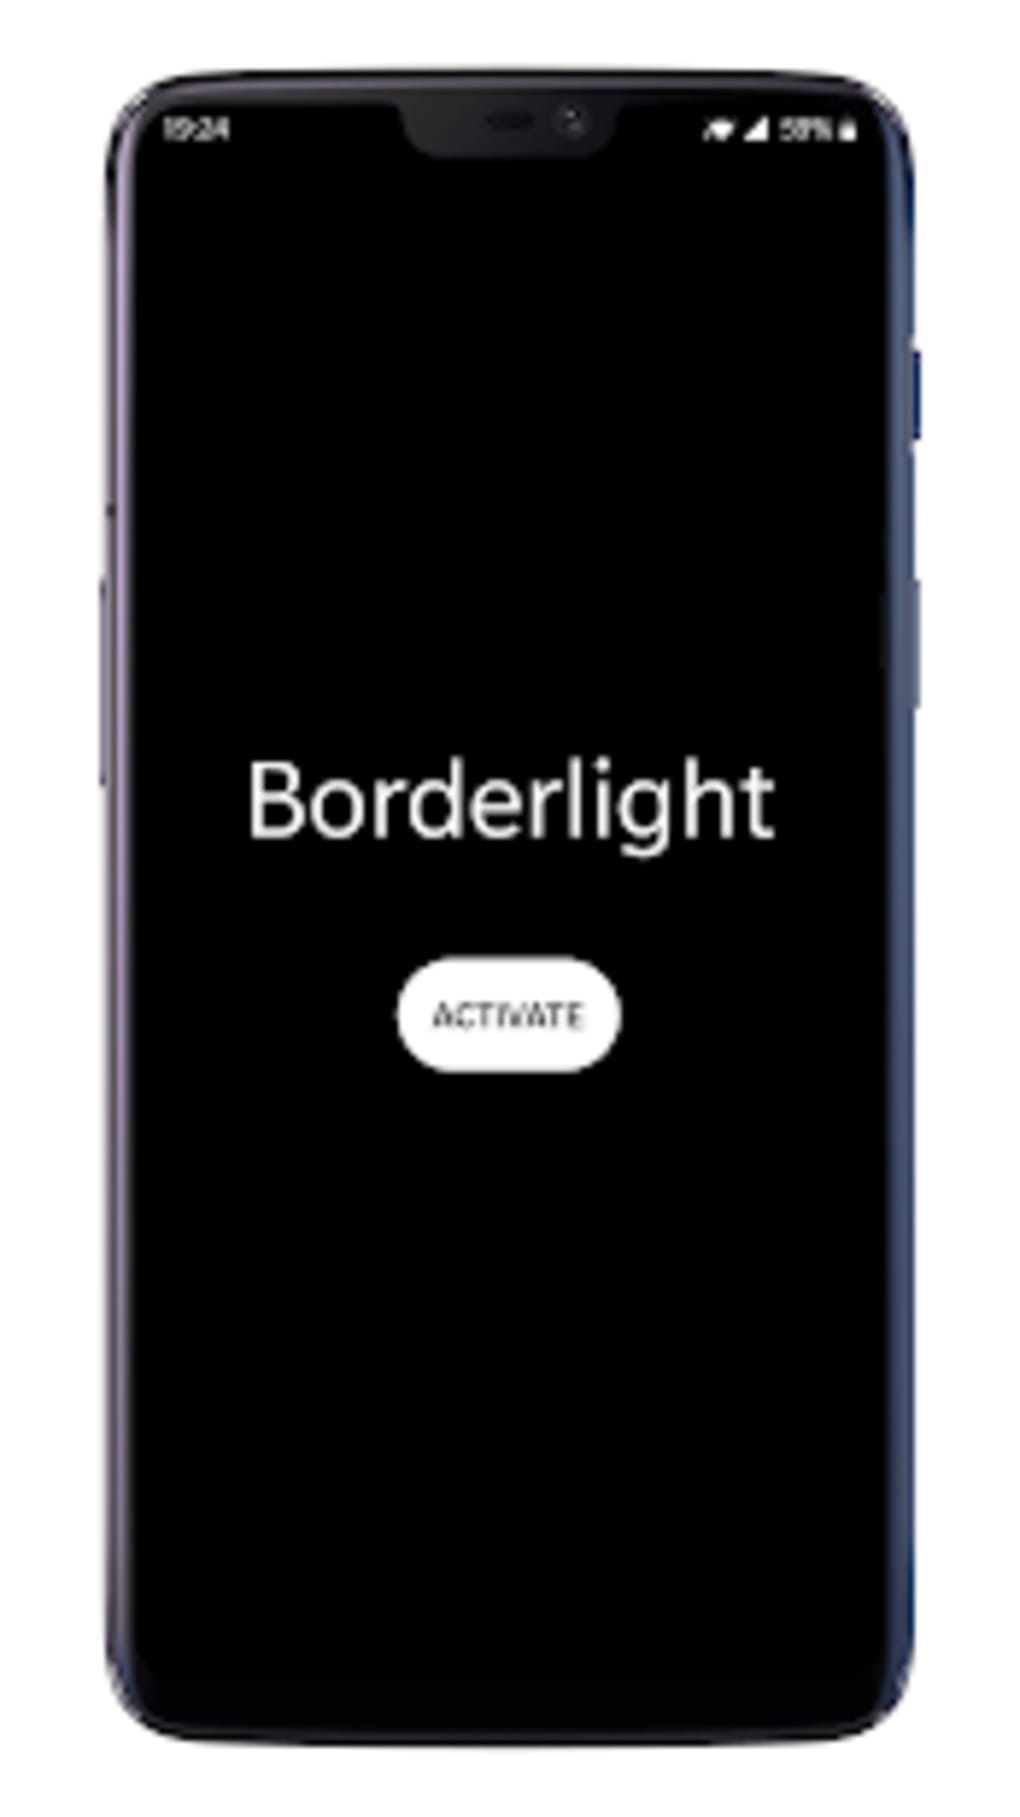 Borderlight Live Wallpaper APK for Android - Download